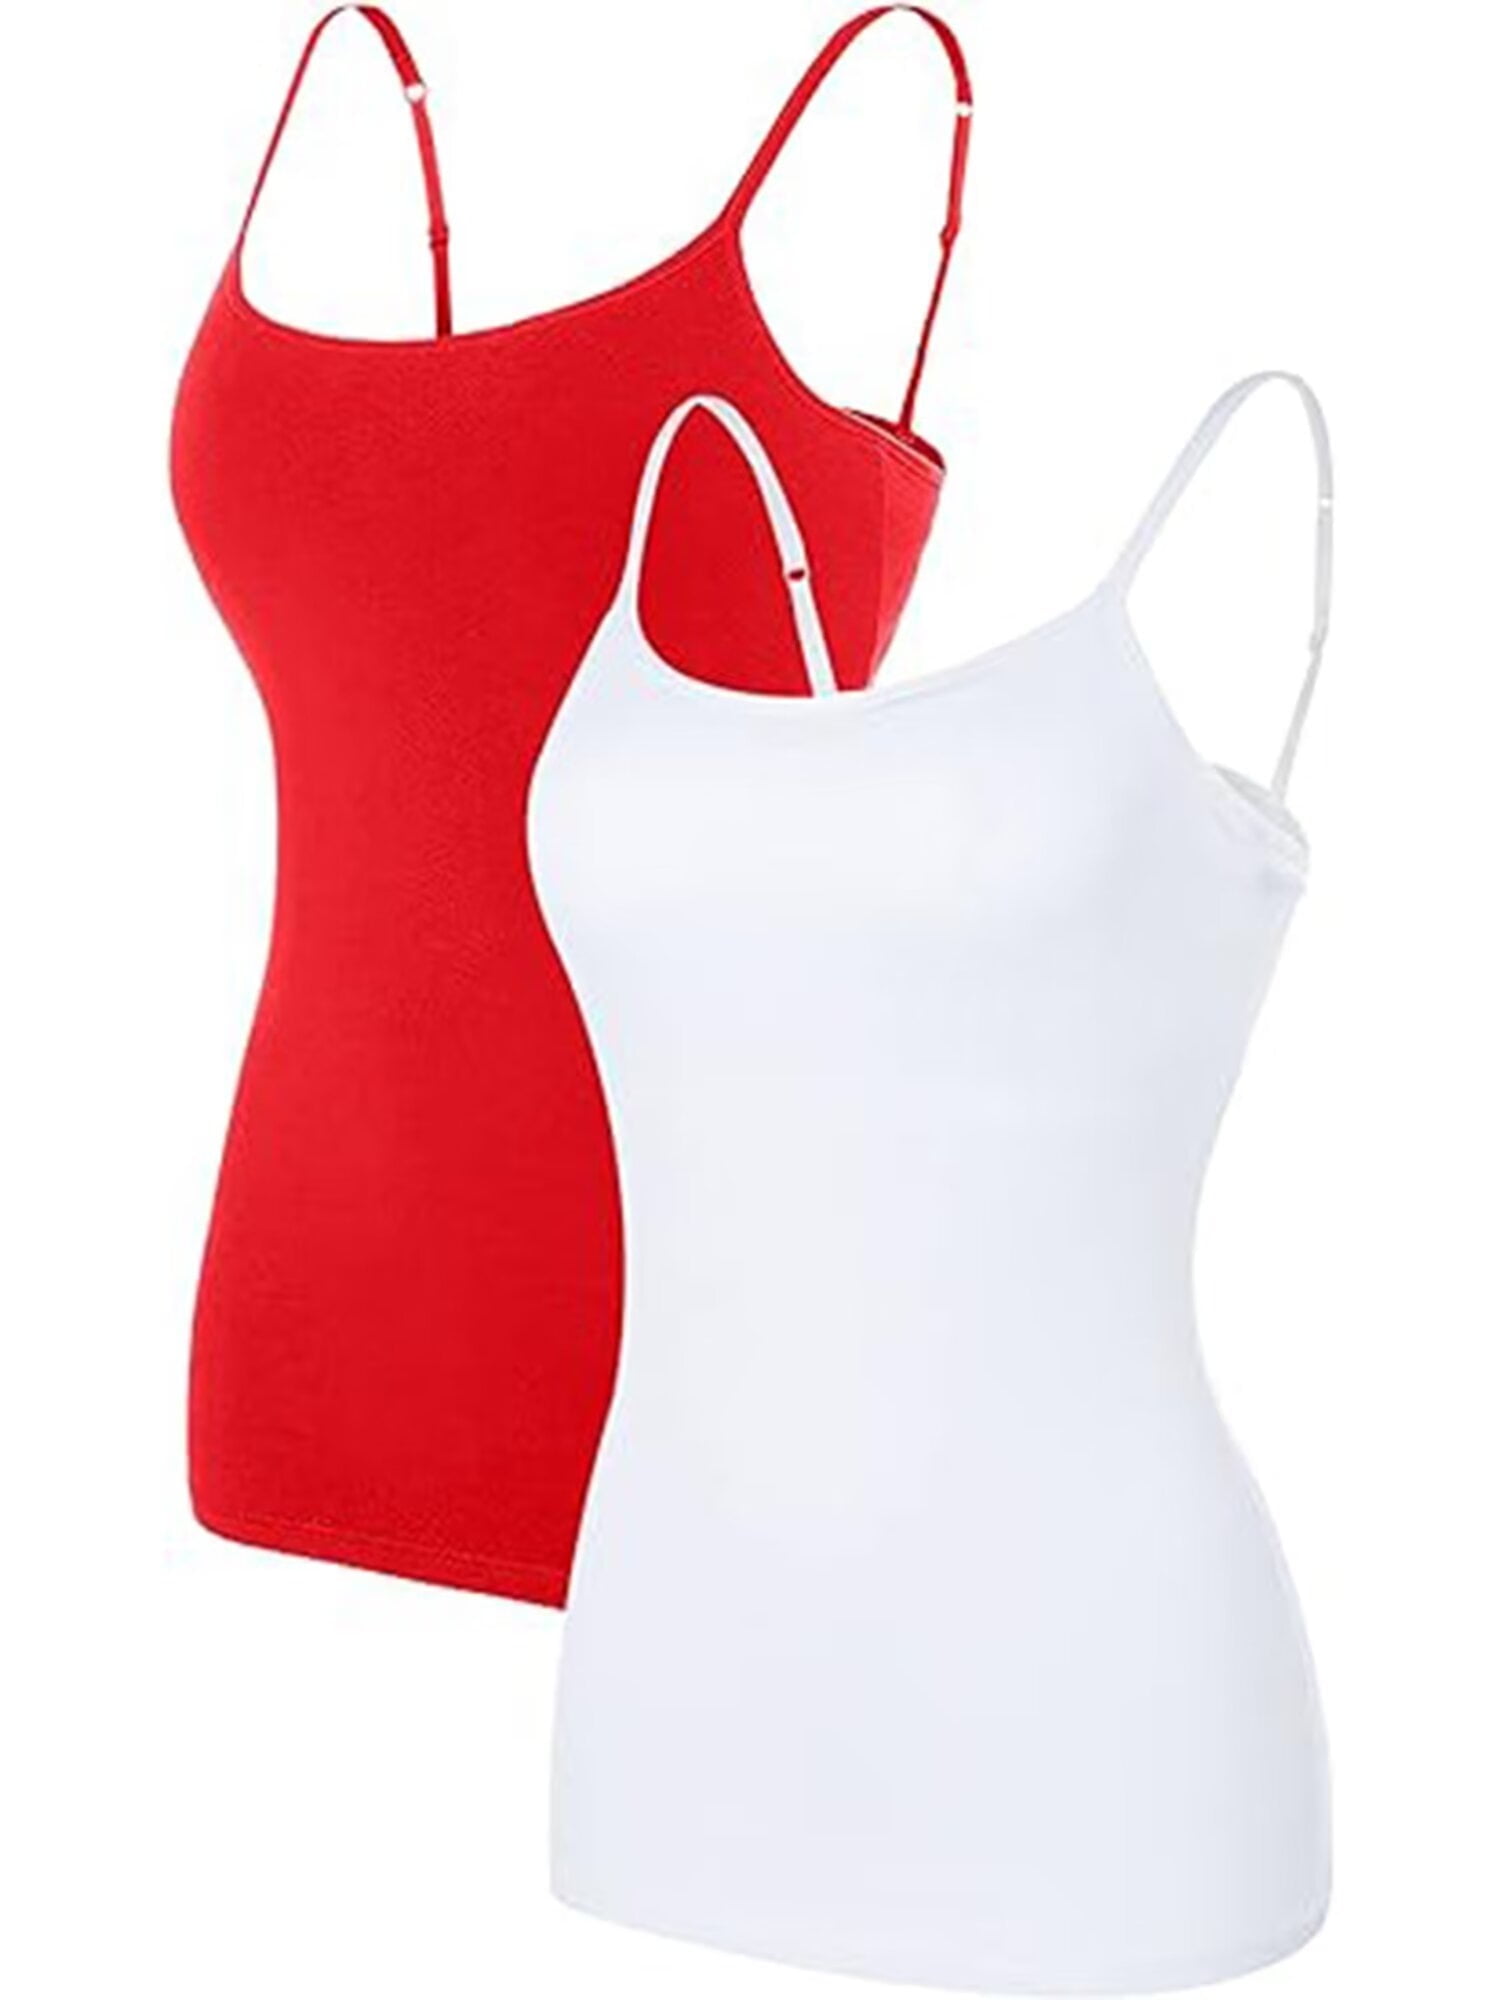 Camisole for Women with Built-in Bra, 2-in-1 5-Finger Cup Camisole with  Chest Pad, Adjustable Spaghetti Strap Tank Tops-D||XXXL